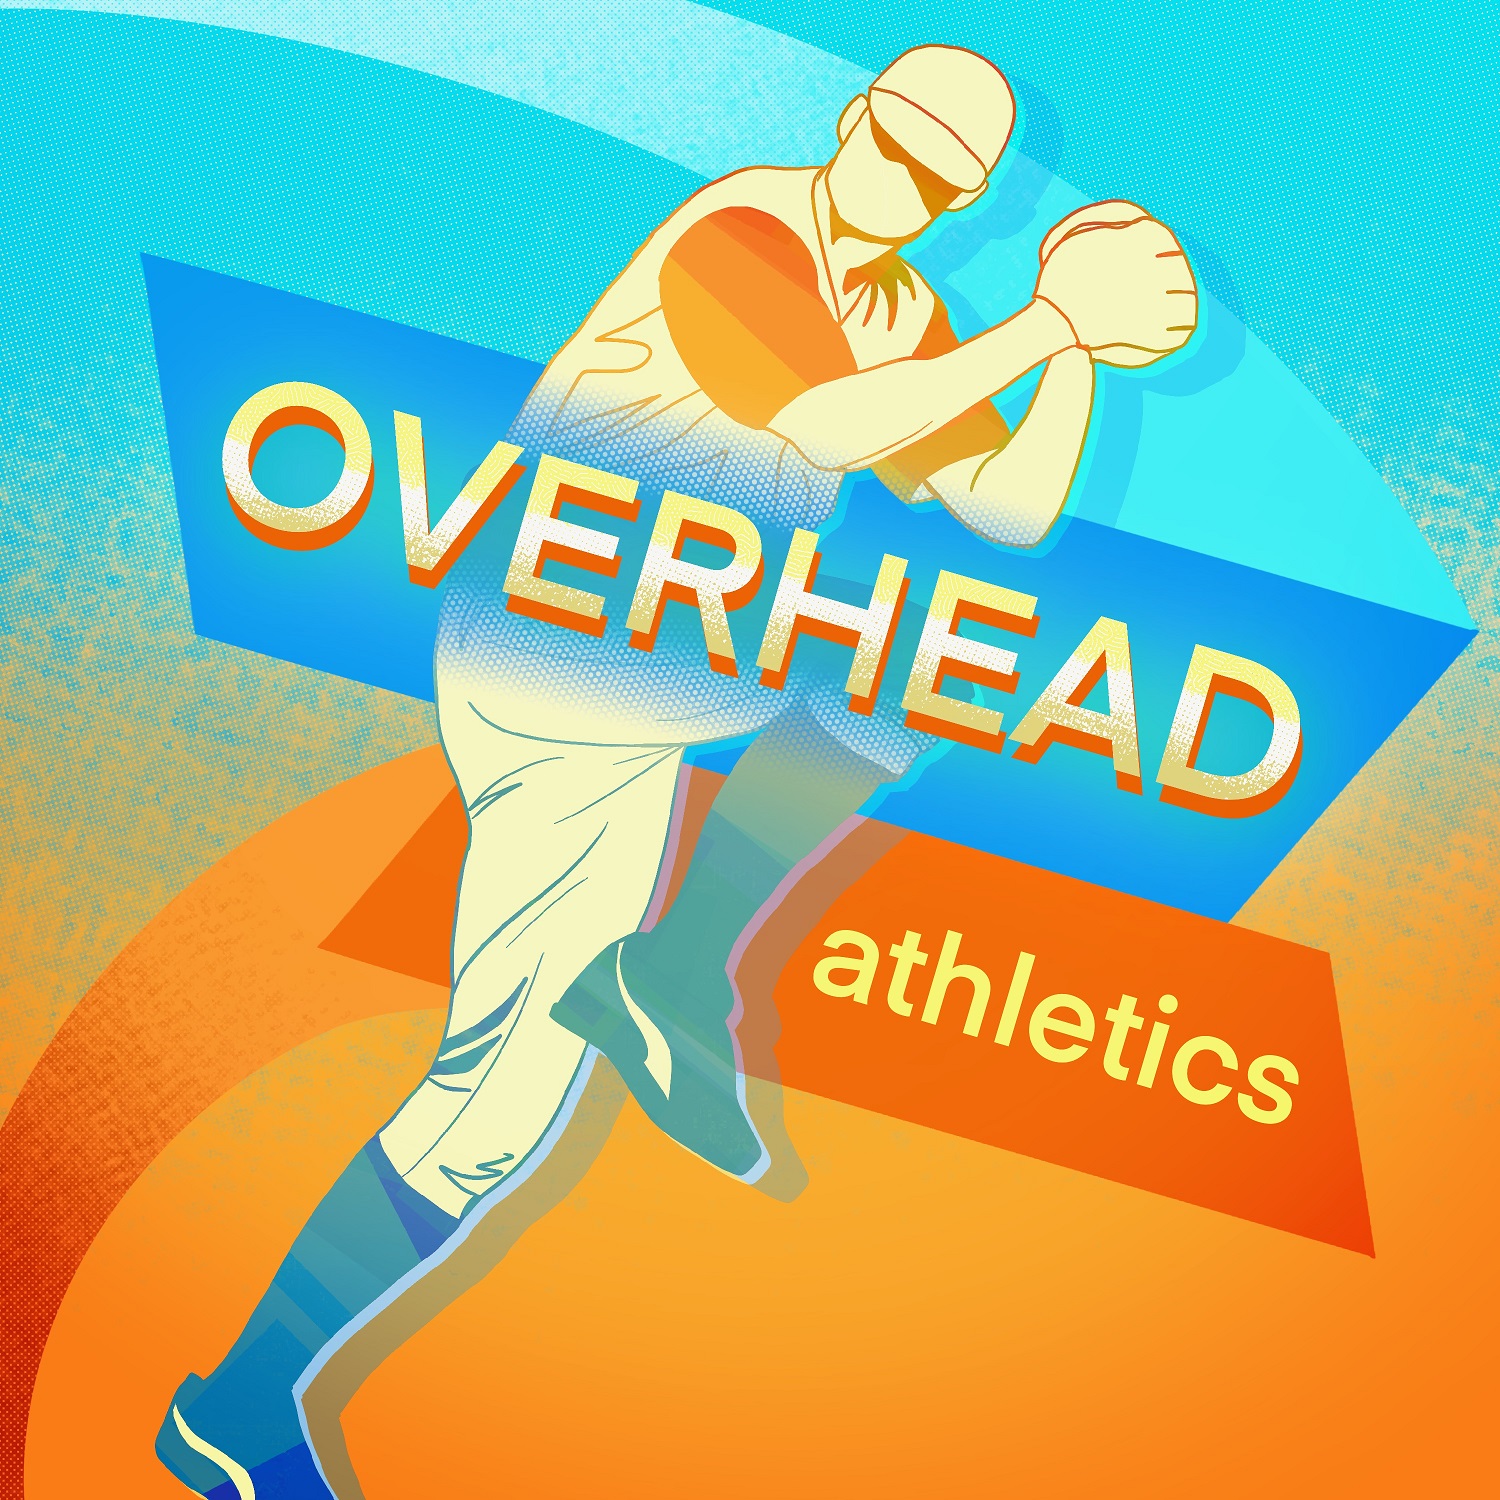 In the Name of Overhead Athletics